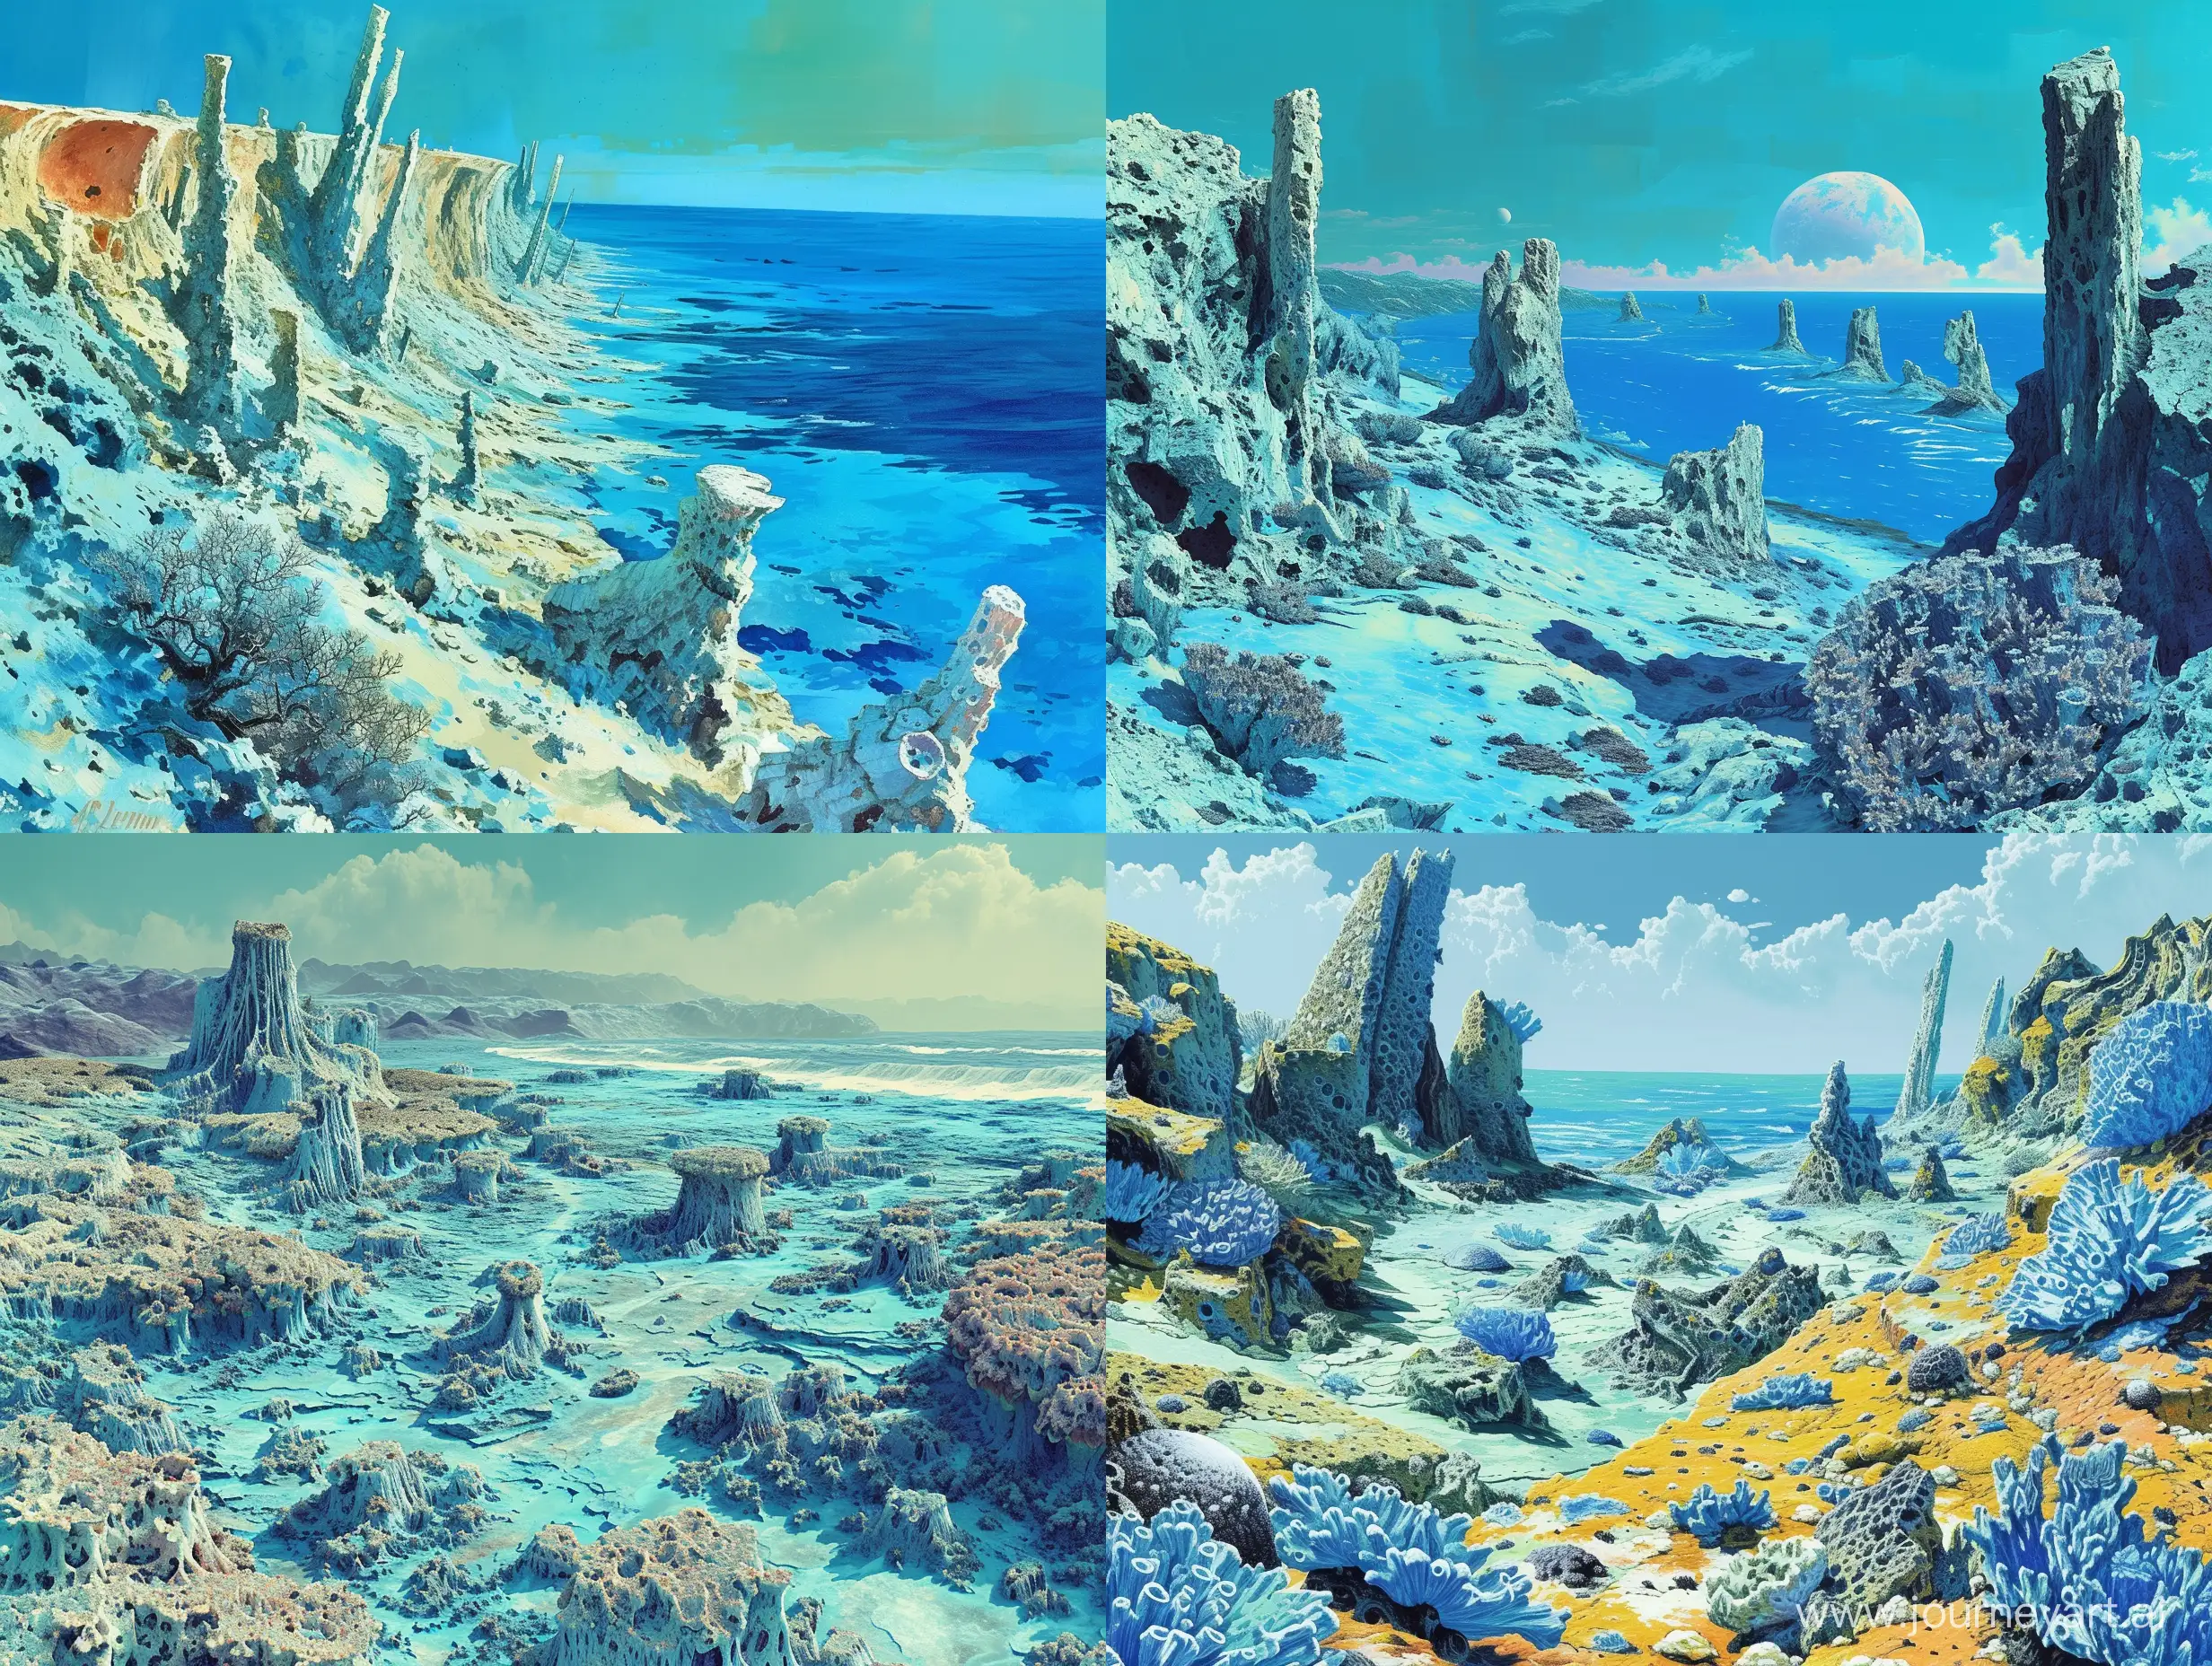 Surreal-Retro-Science-Fiction-Art-Alien-Ocean-Coast-with-Desiccated-Coral-Structures